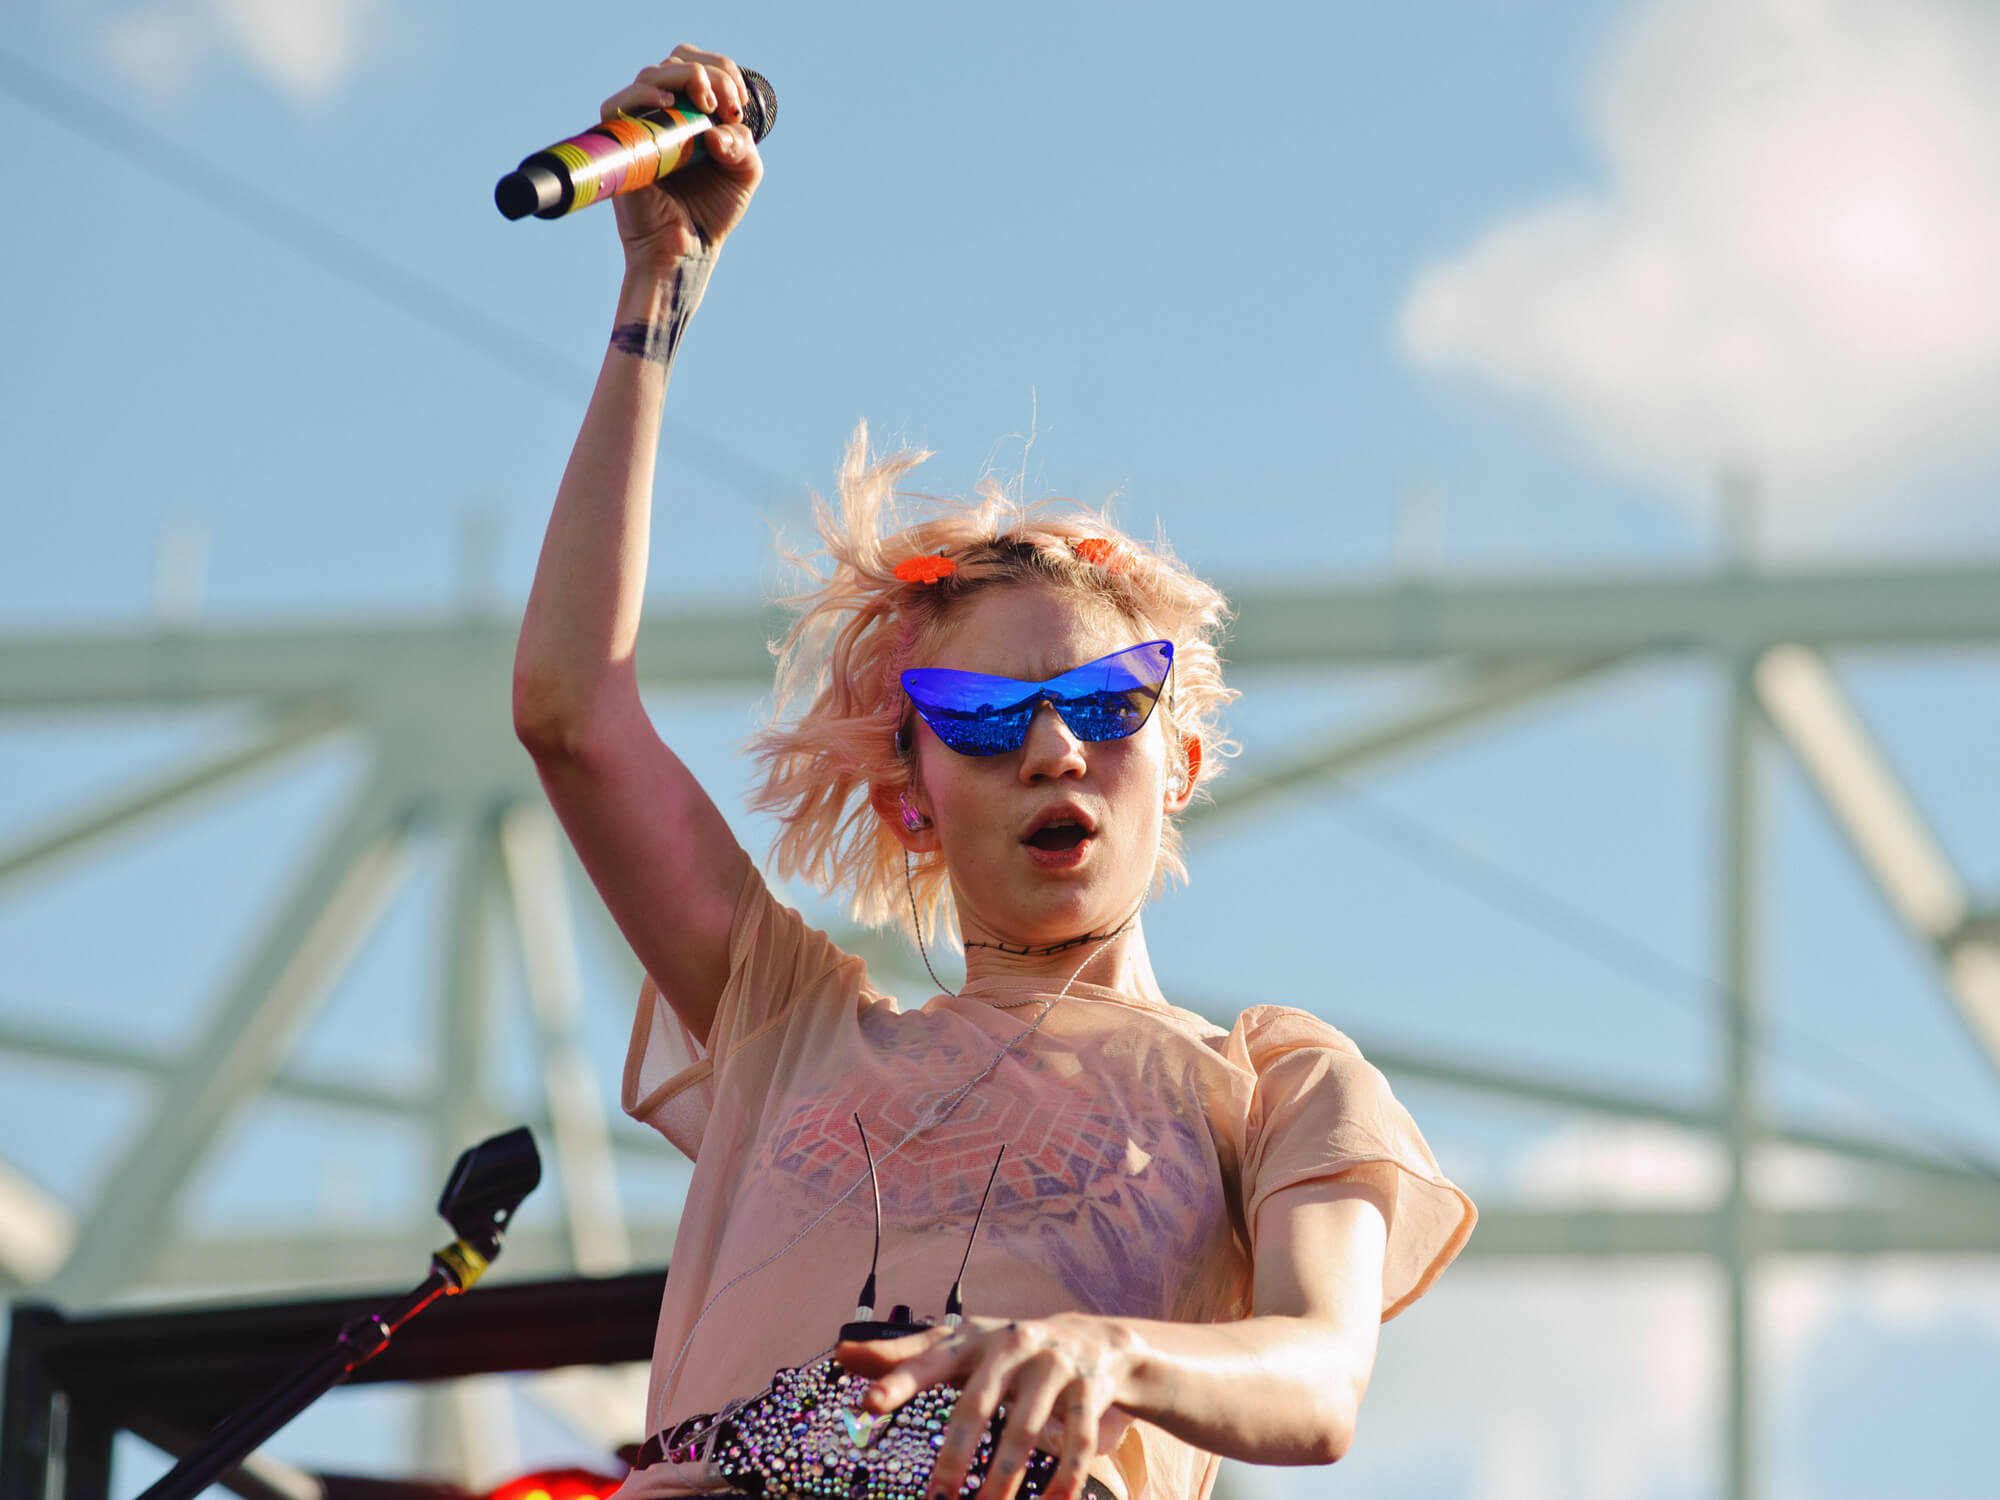 Grimes performing